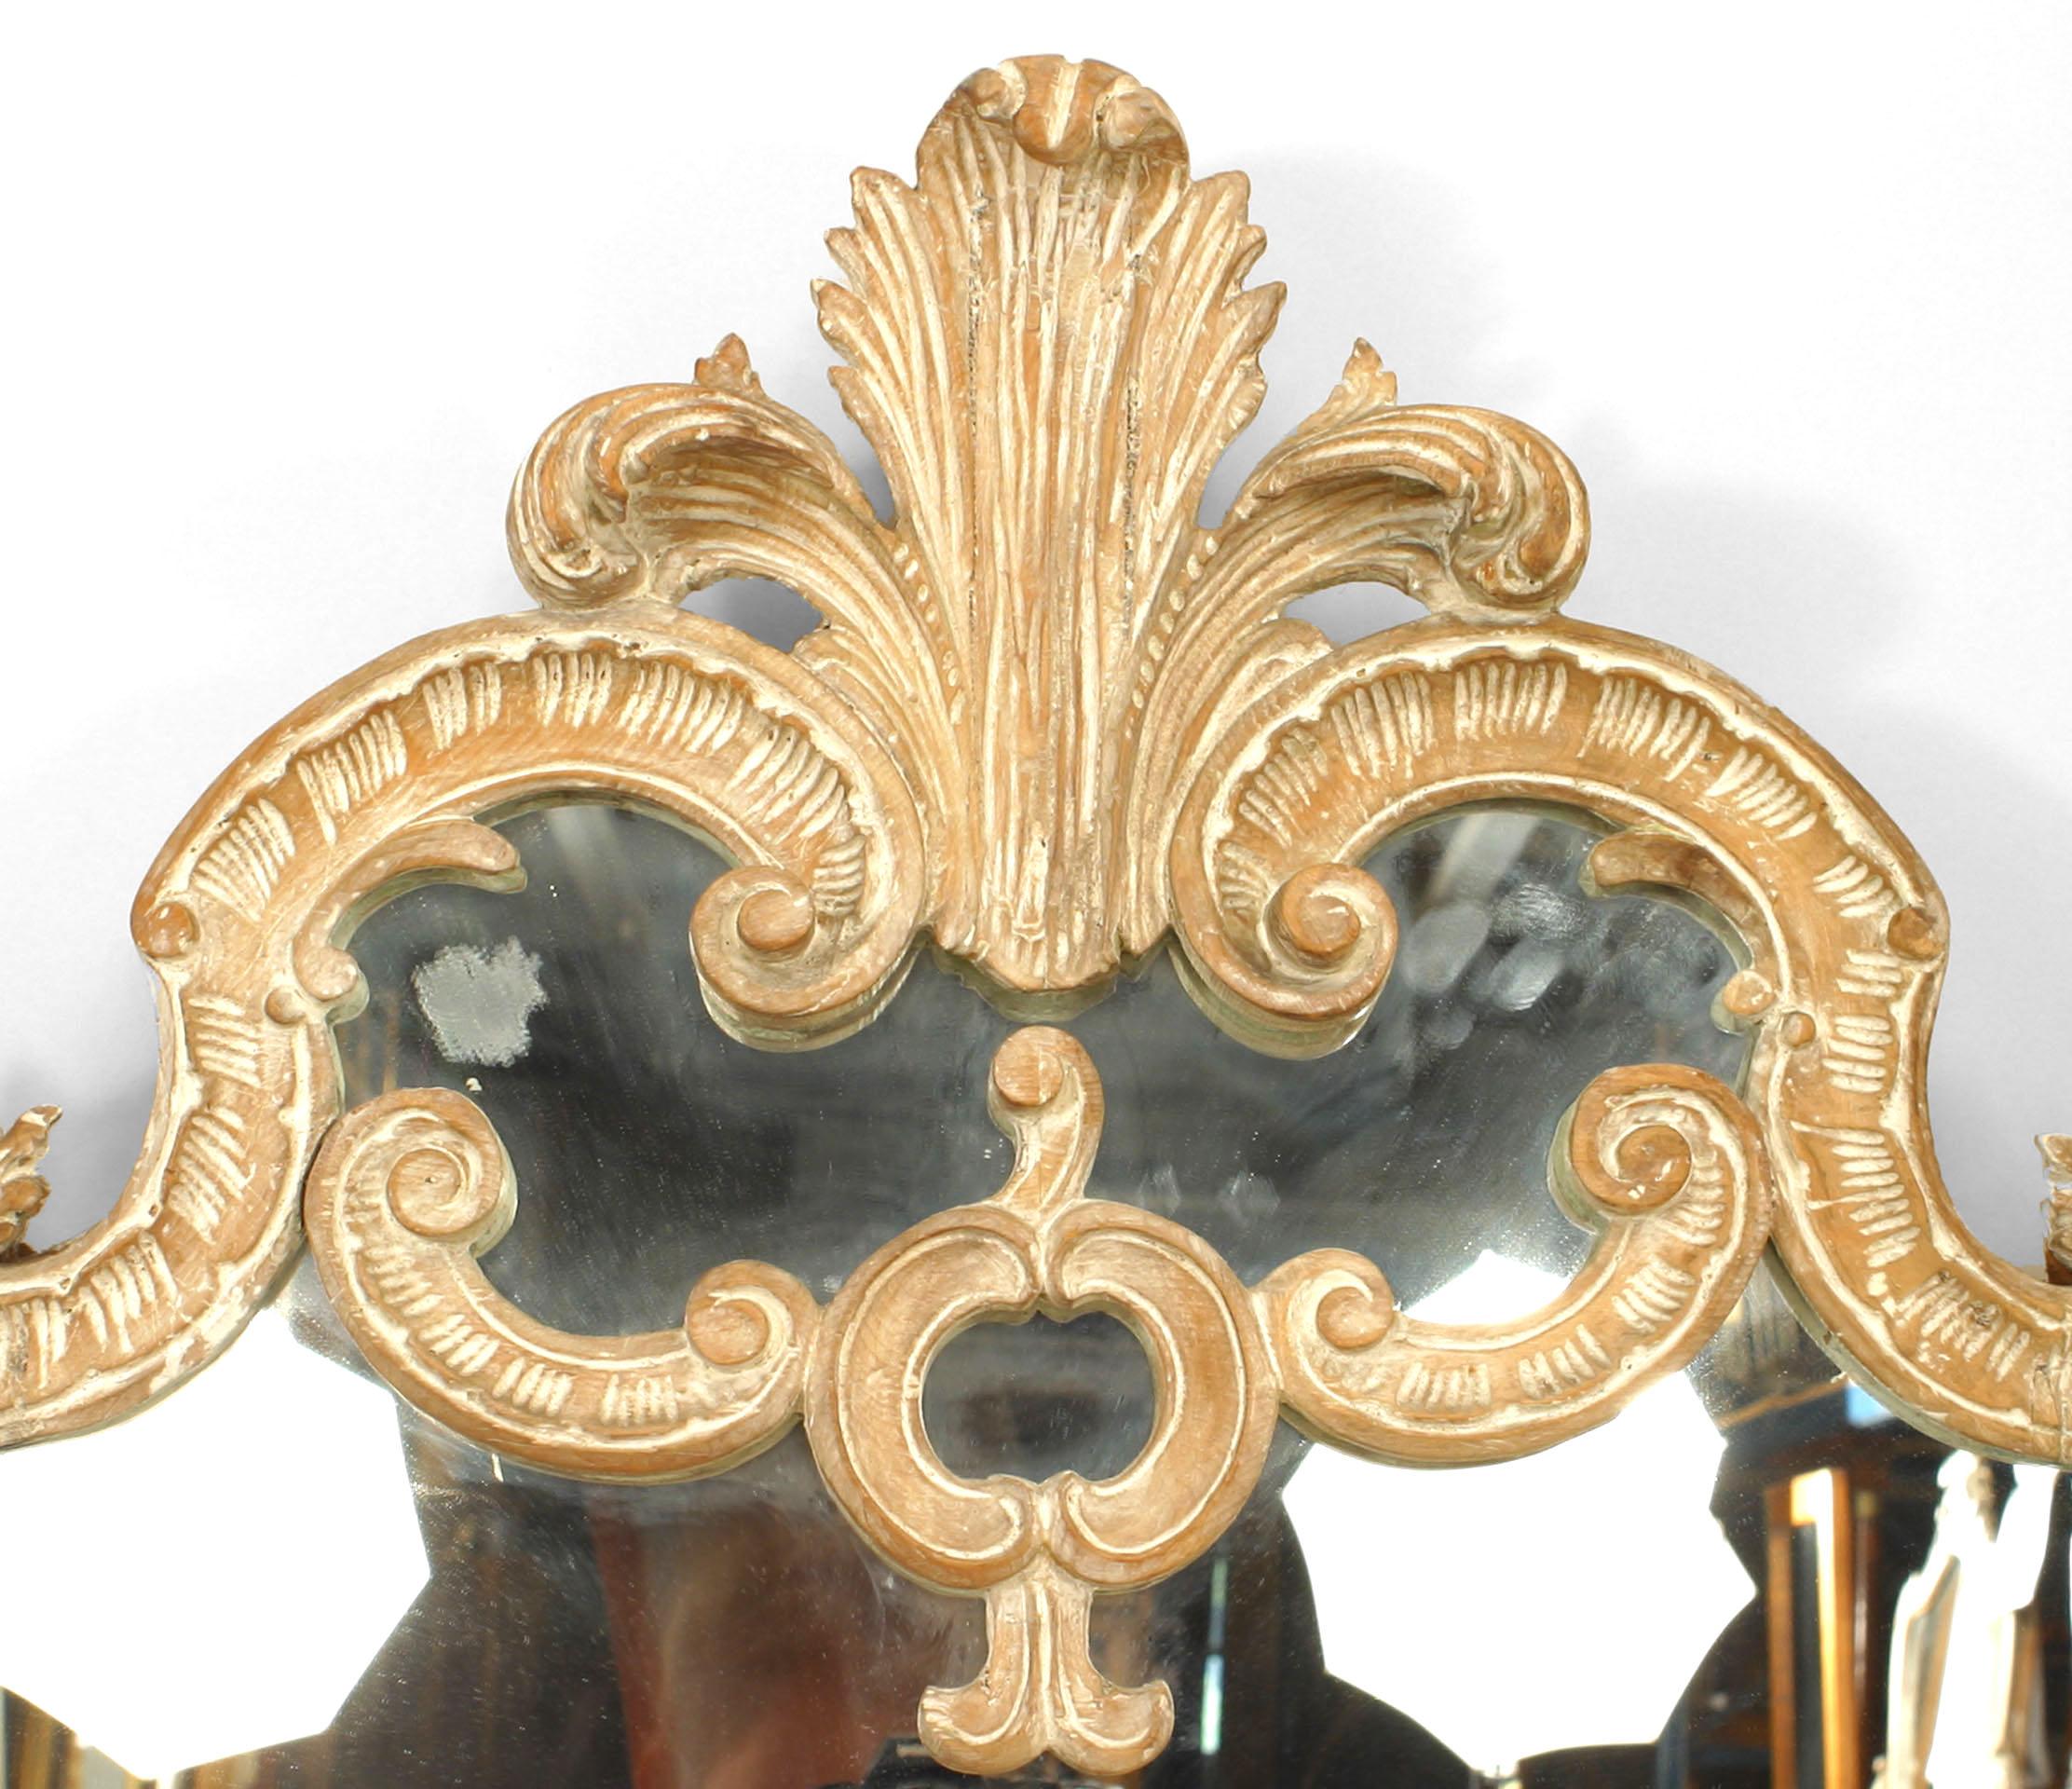 French Louis XV-style (19th/20th Century) horizontal bleached wood wall mirror with a carved scroll design and triple plume top.
